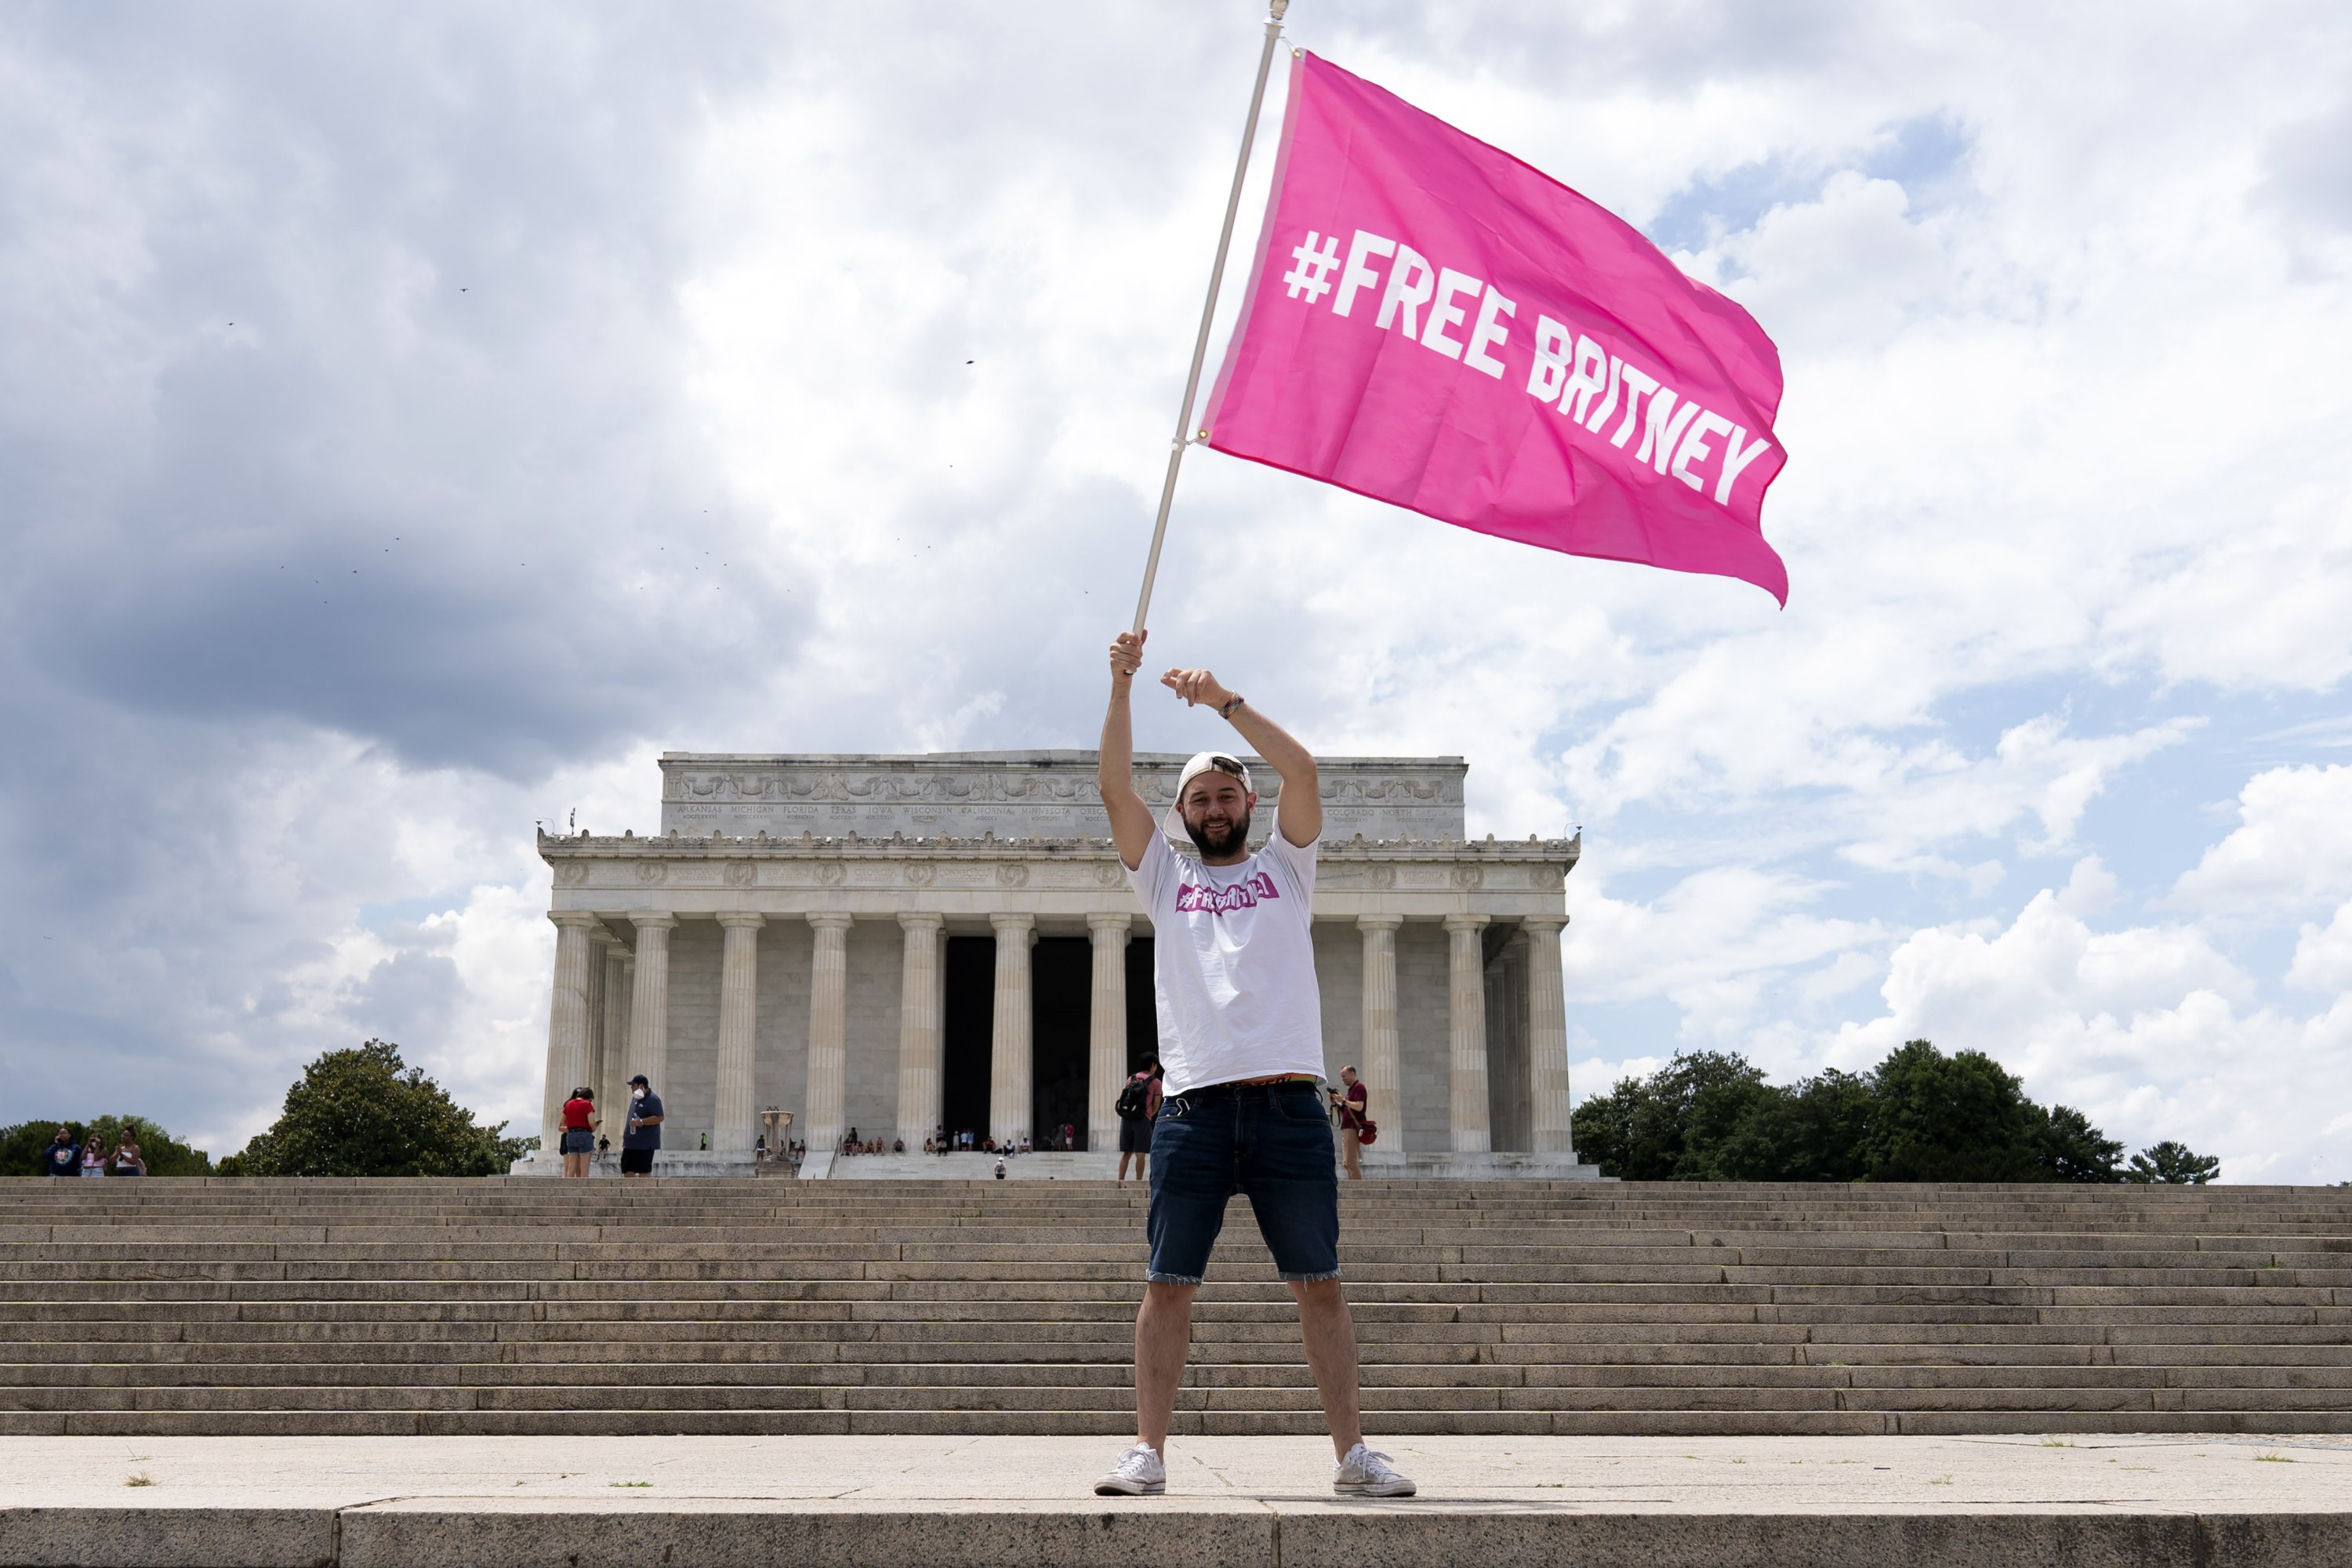 Fans and supporters of pop star Britney Spears protest at the Lincoln Memorial, during the "Free Britney" rally, Washington, U.S., July 14, 2021. (AP Photo)